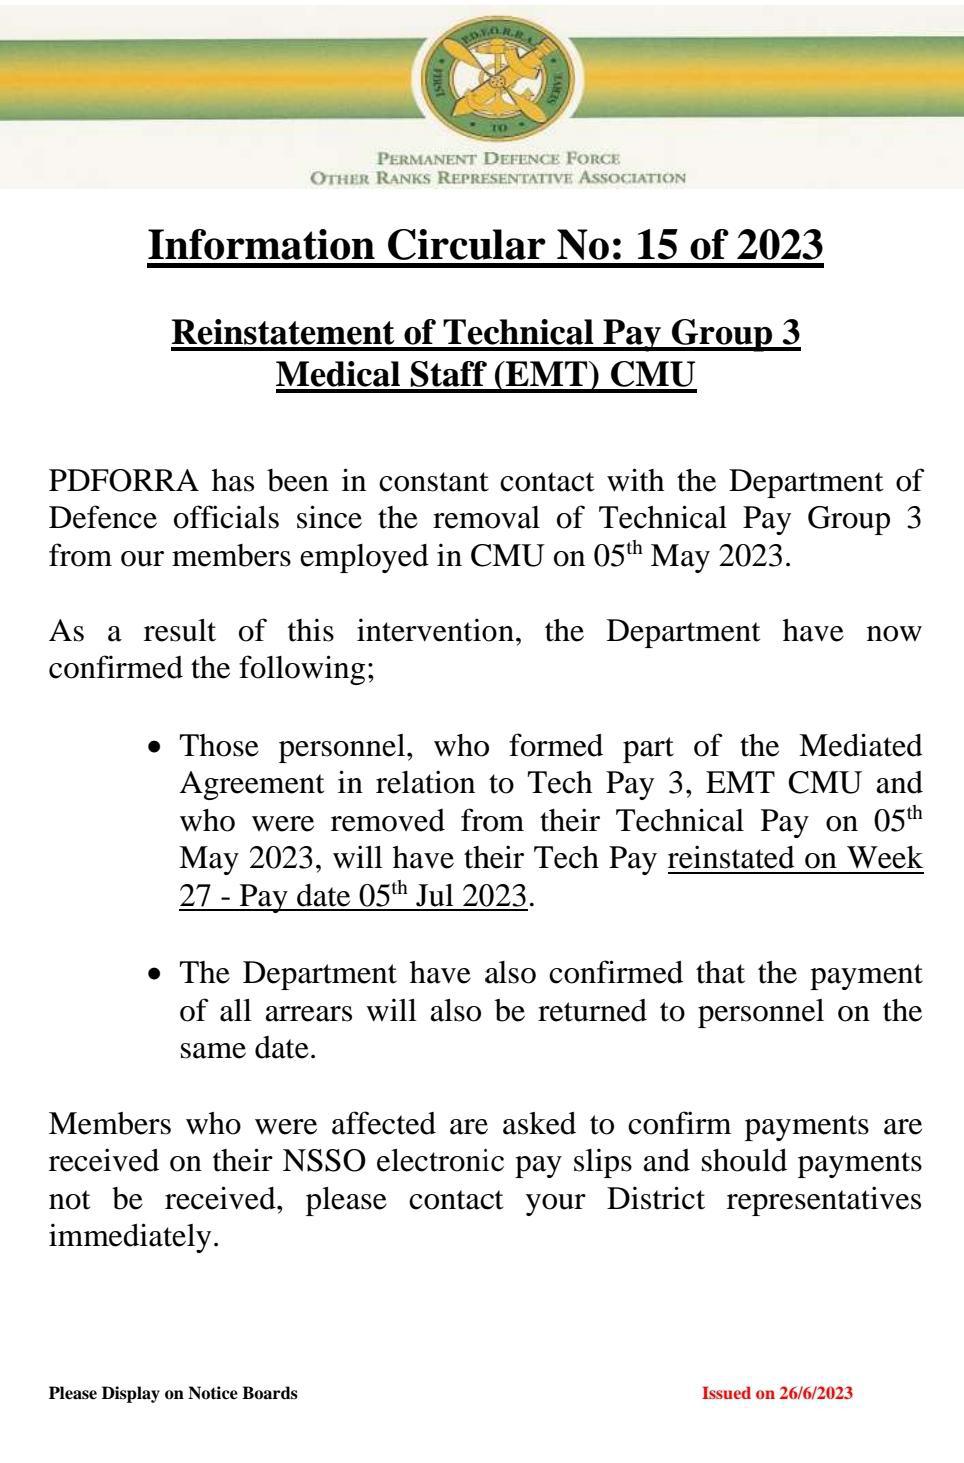 Information Circular No 15 of 23 - Reinstatement of Tech Pay Group 3 to Medical Staff (EMT) CMU